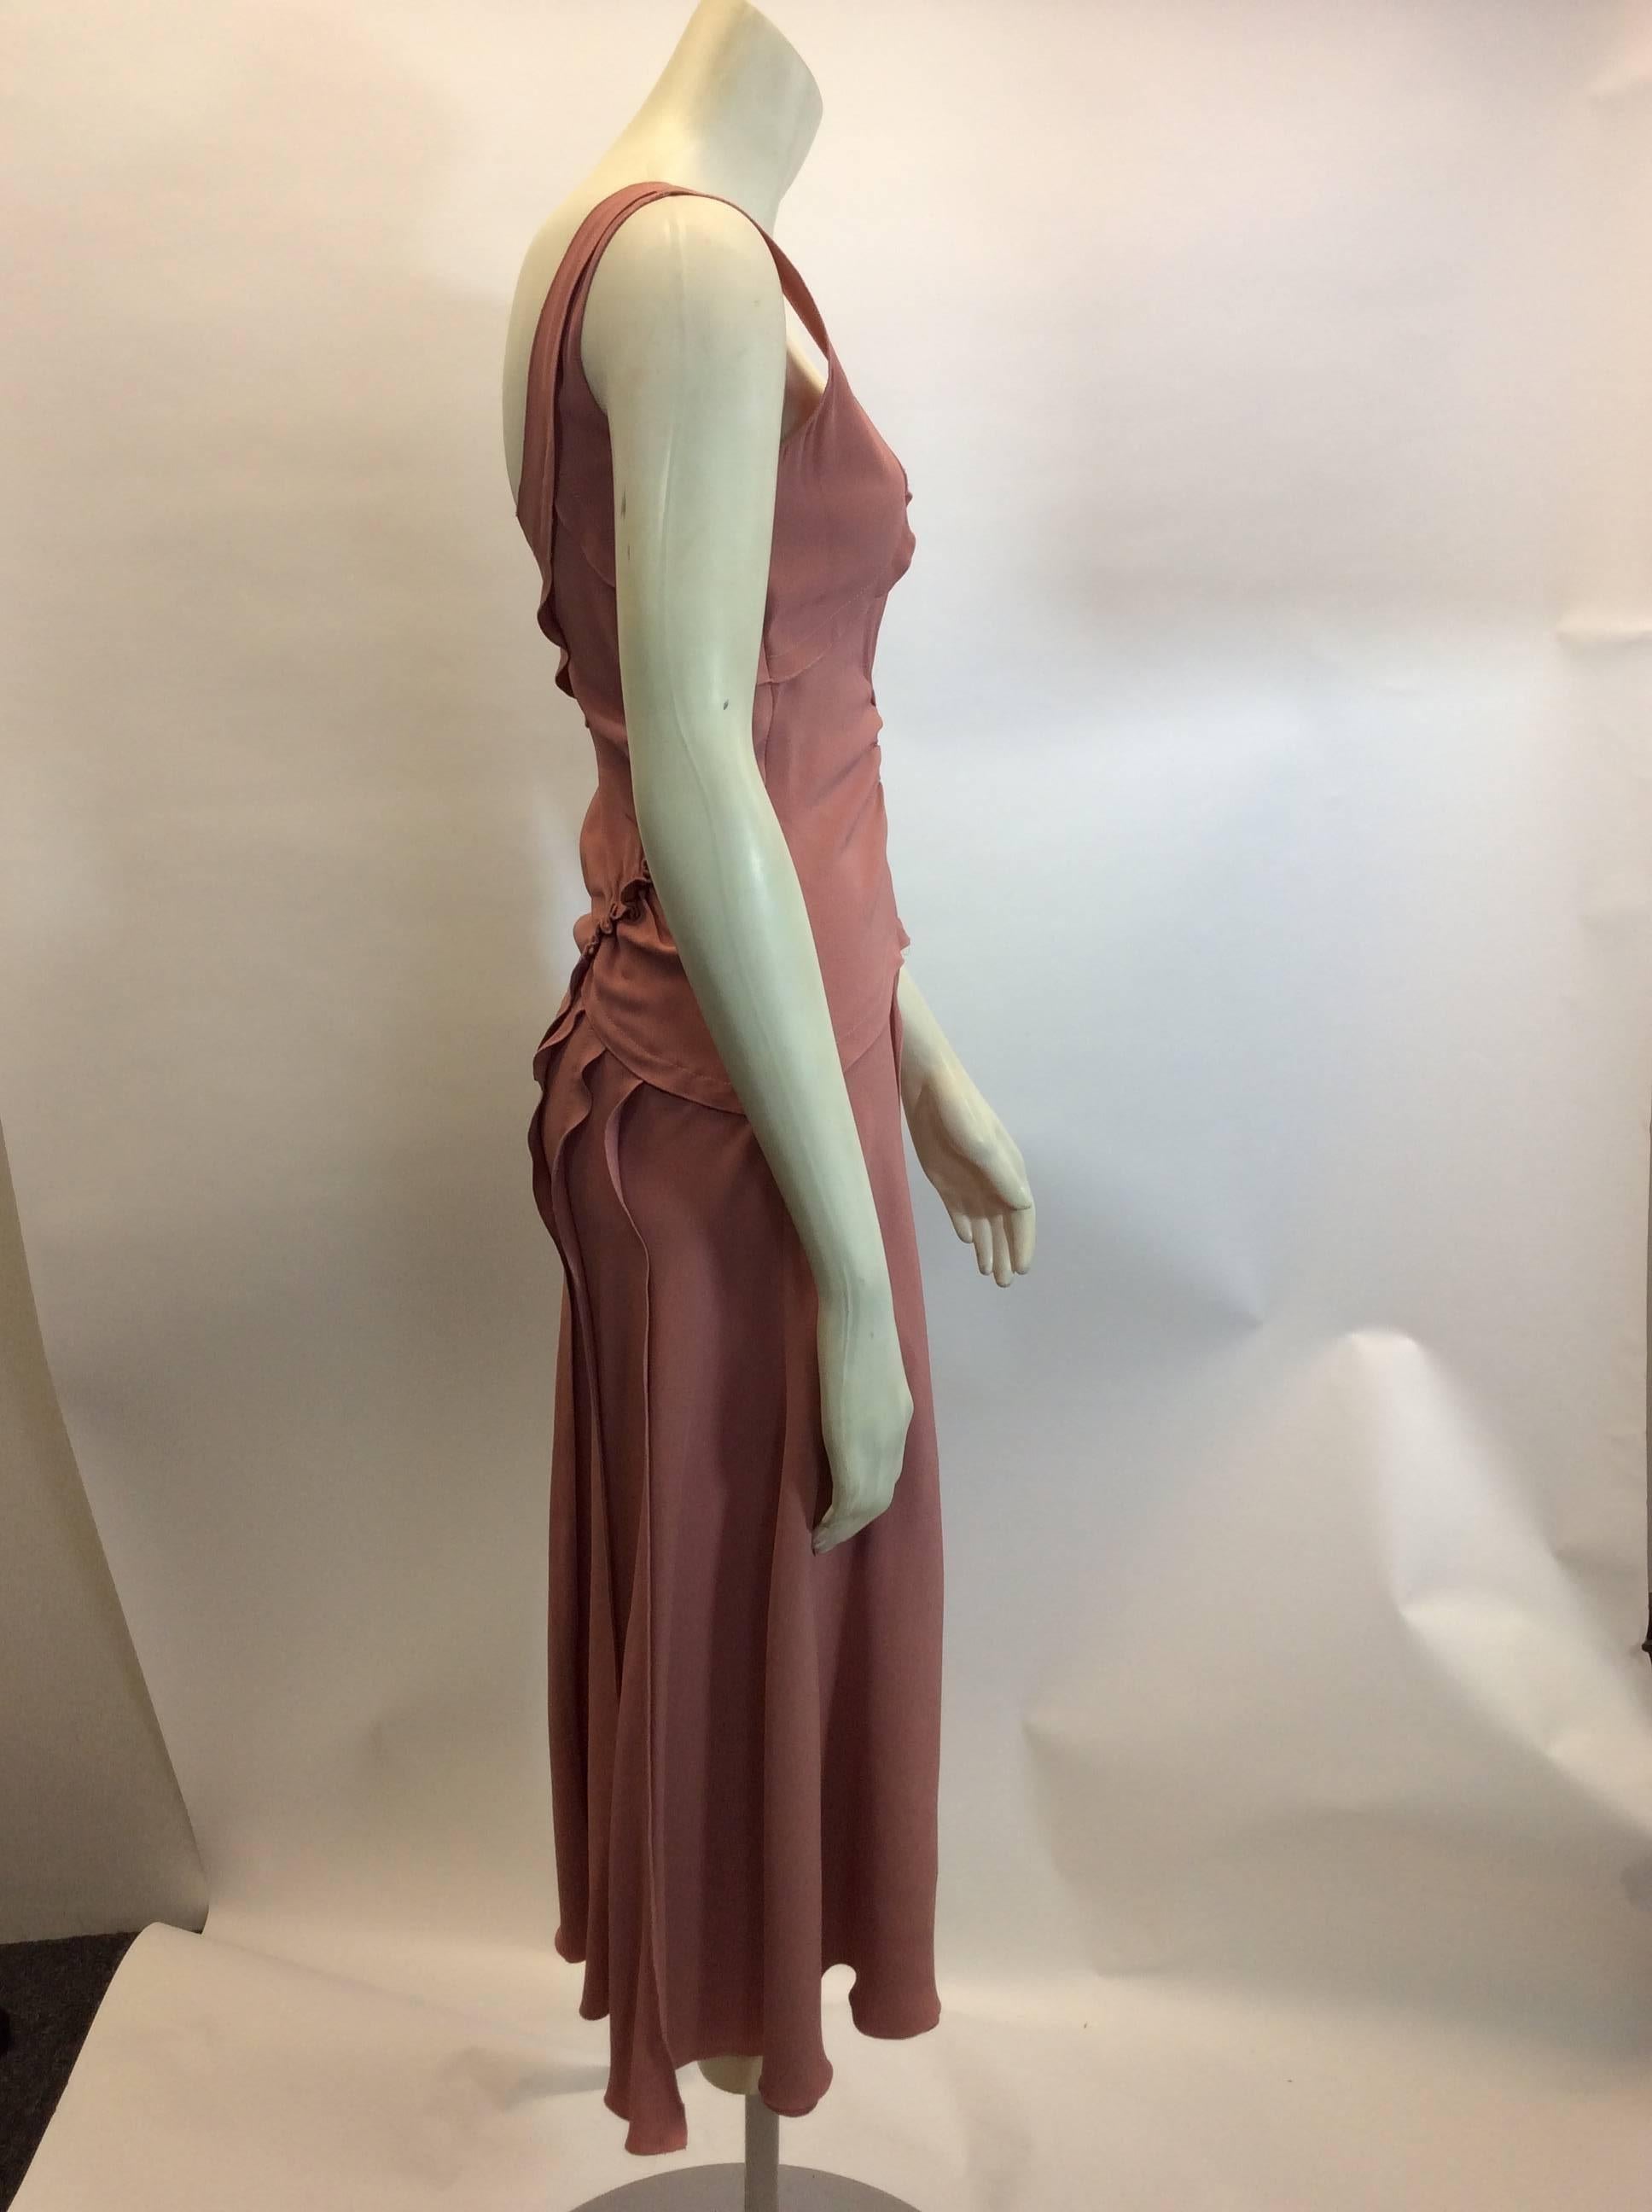 Prada Blush Gathered Dress In Excellent Condition For Sale In Narberth, PA